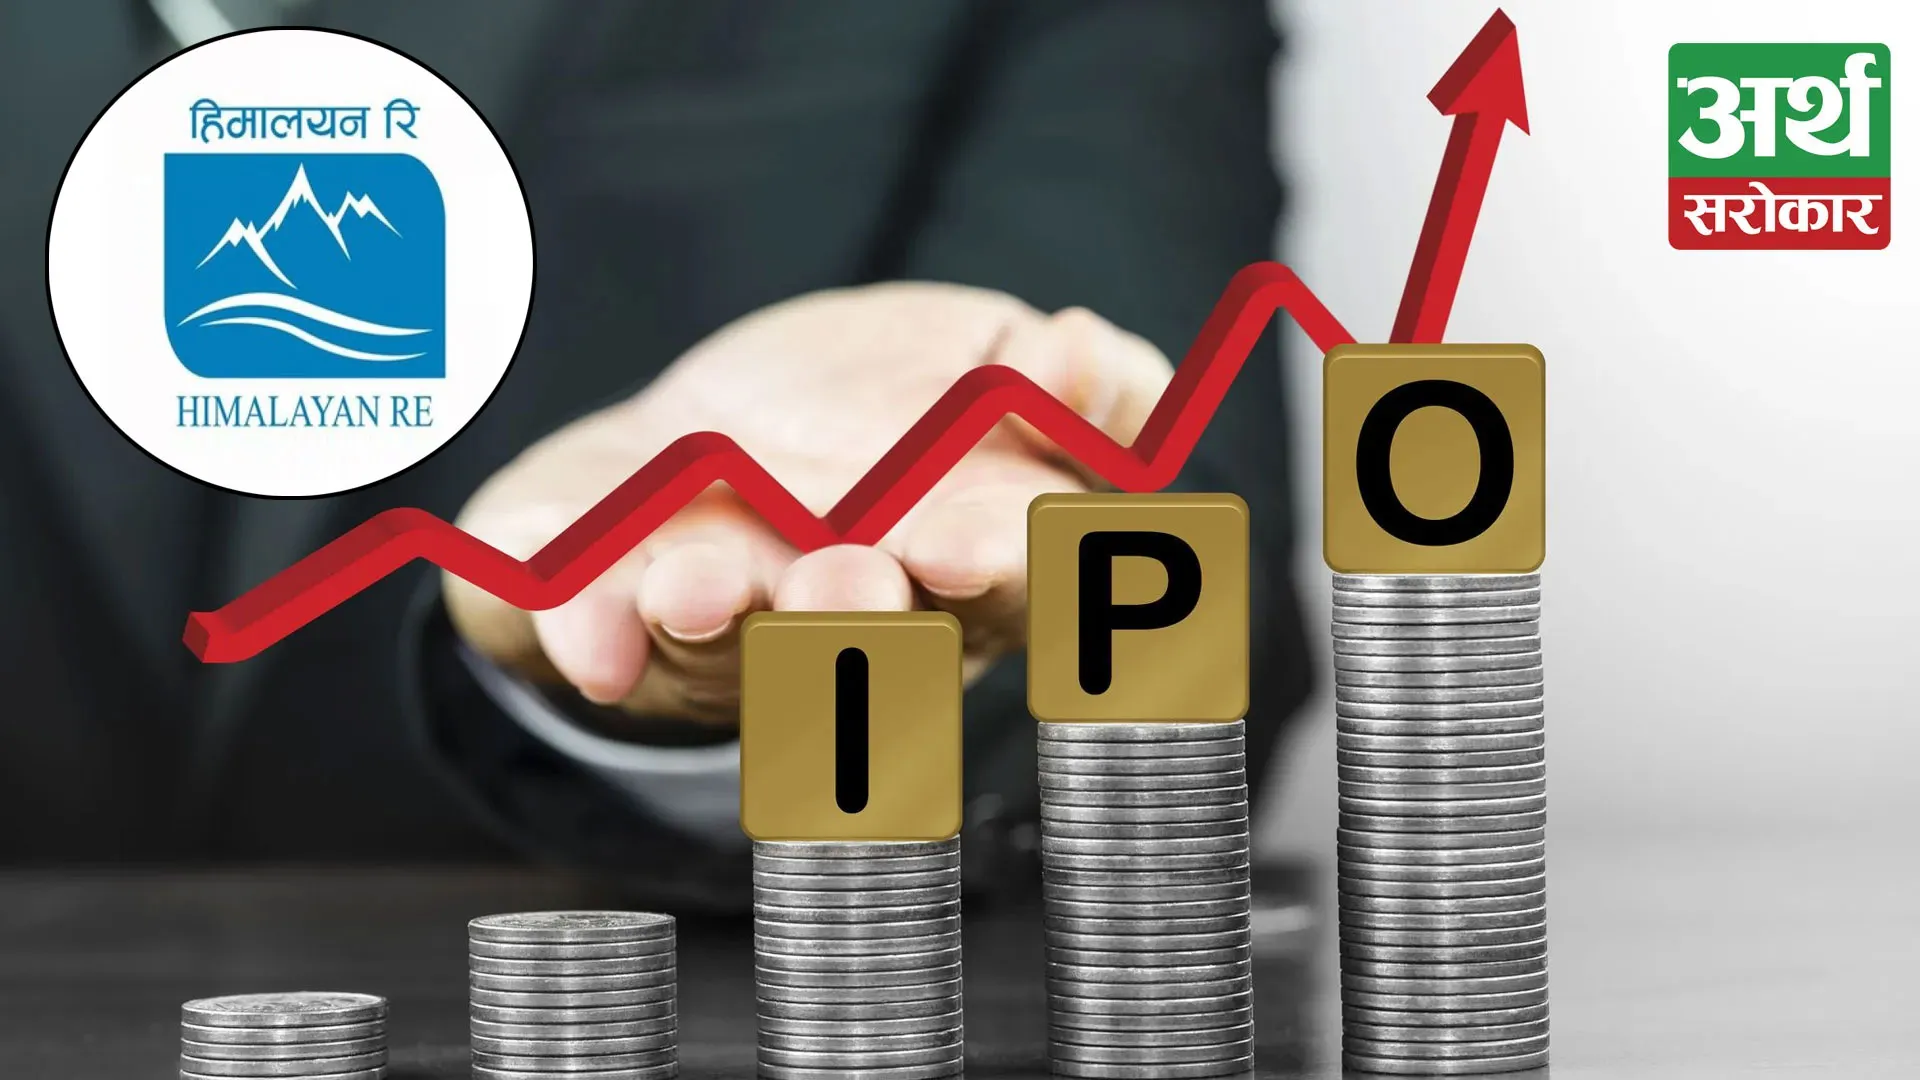 Himalayan Reinsurance announced an IPO for the general public